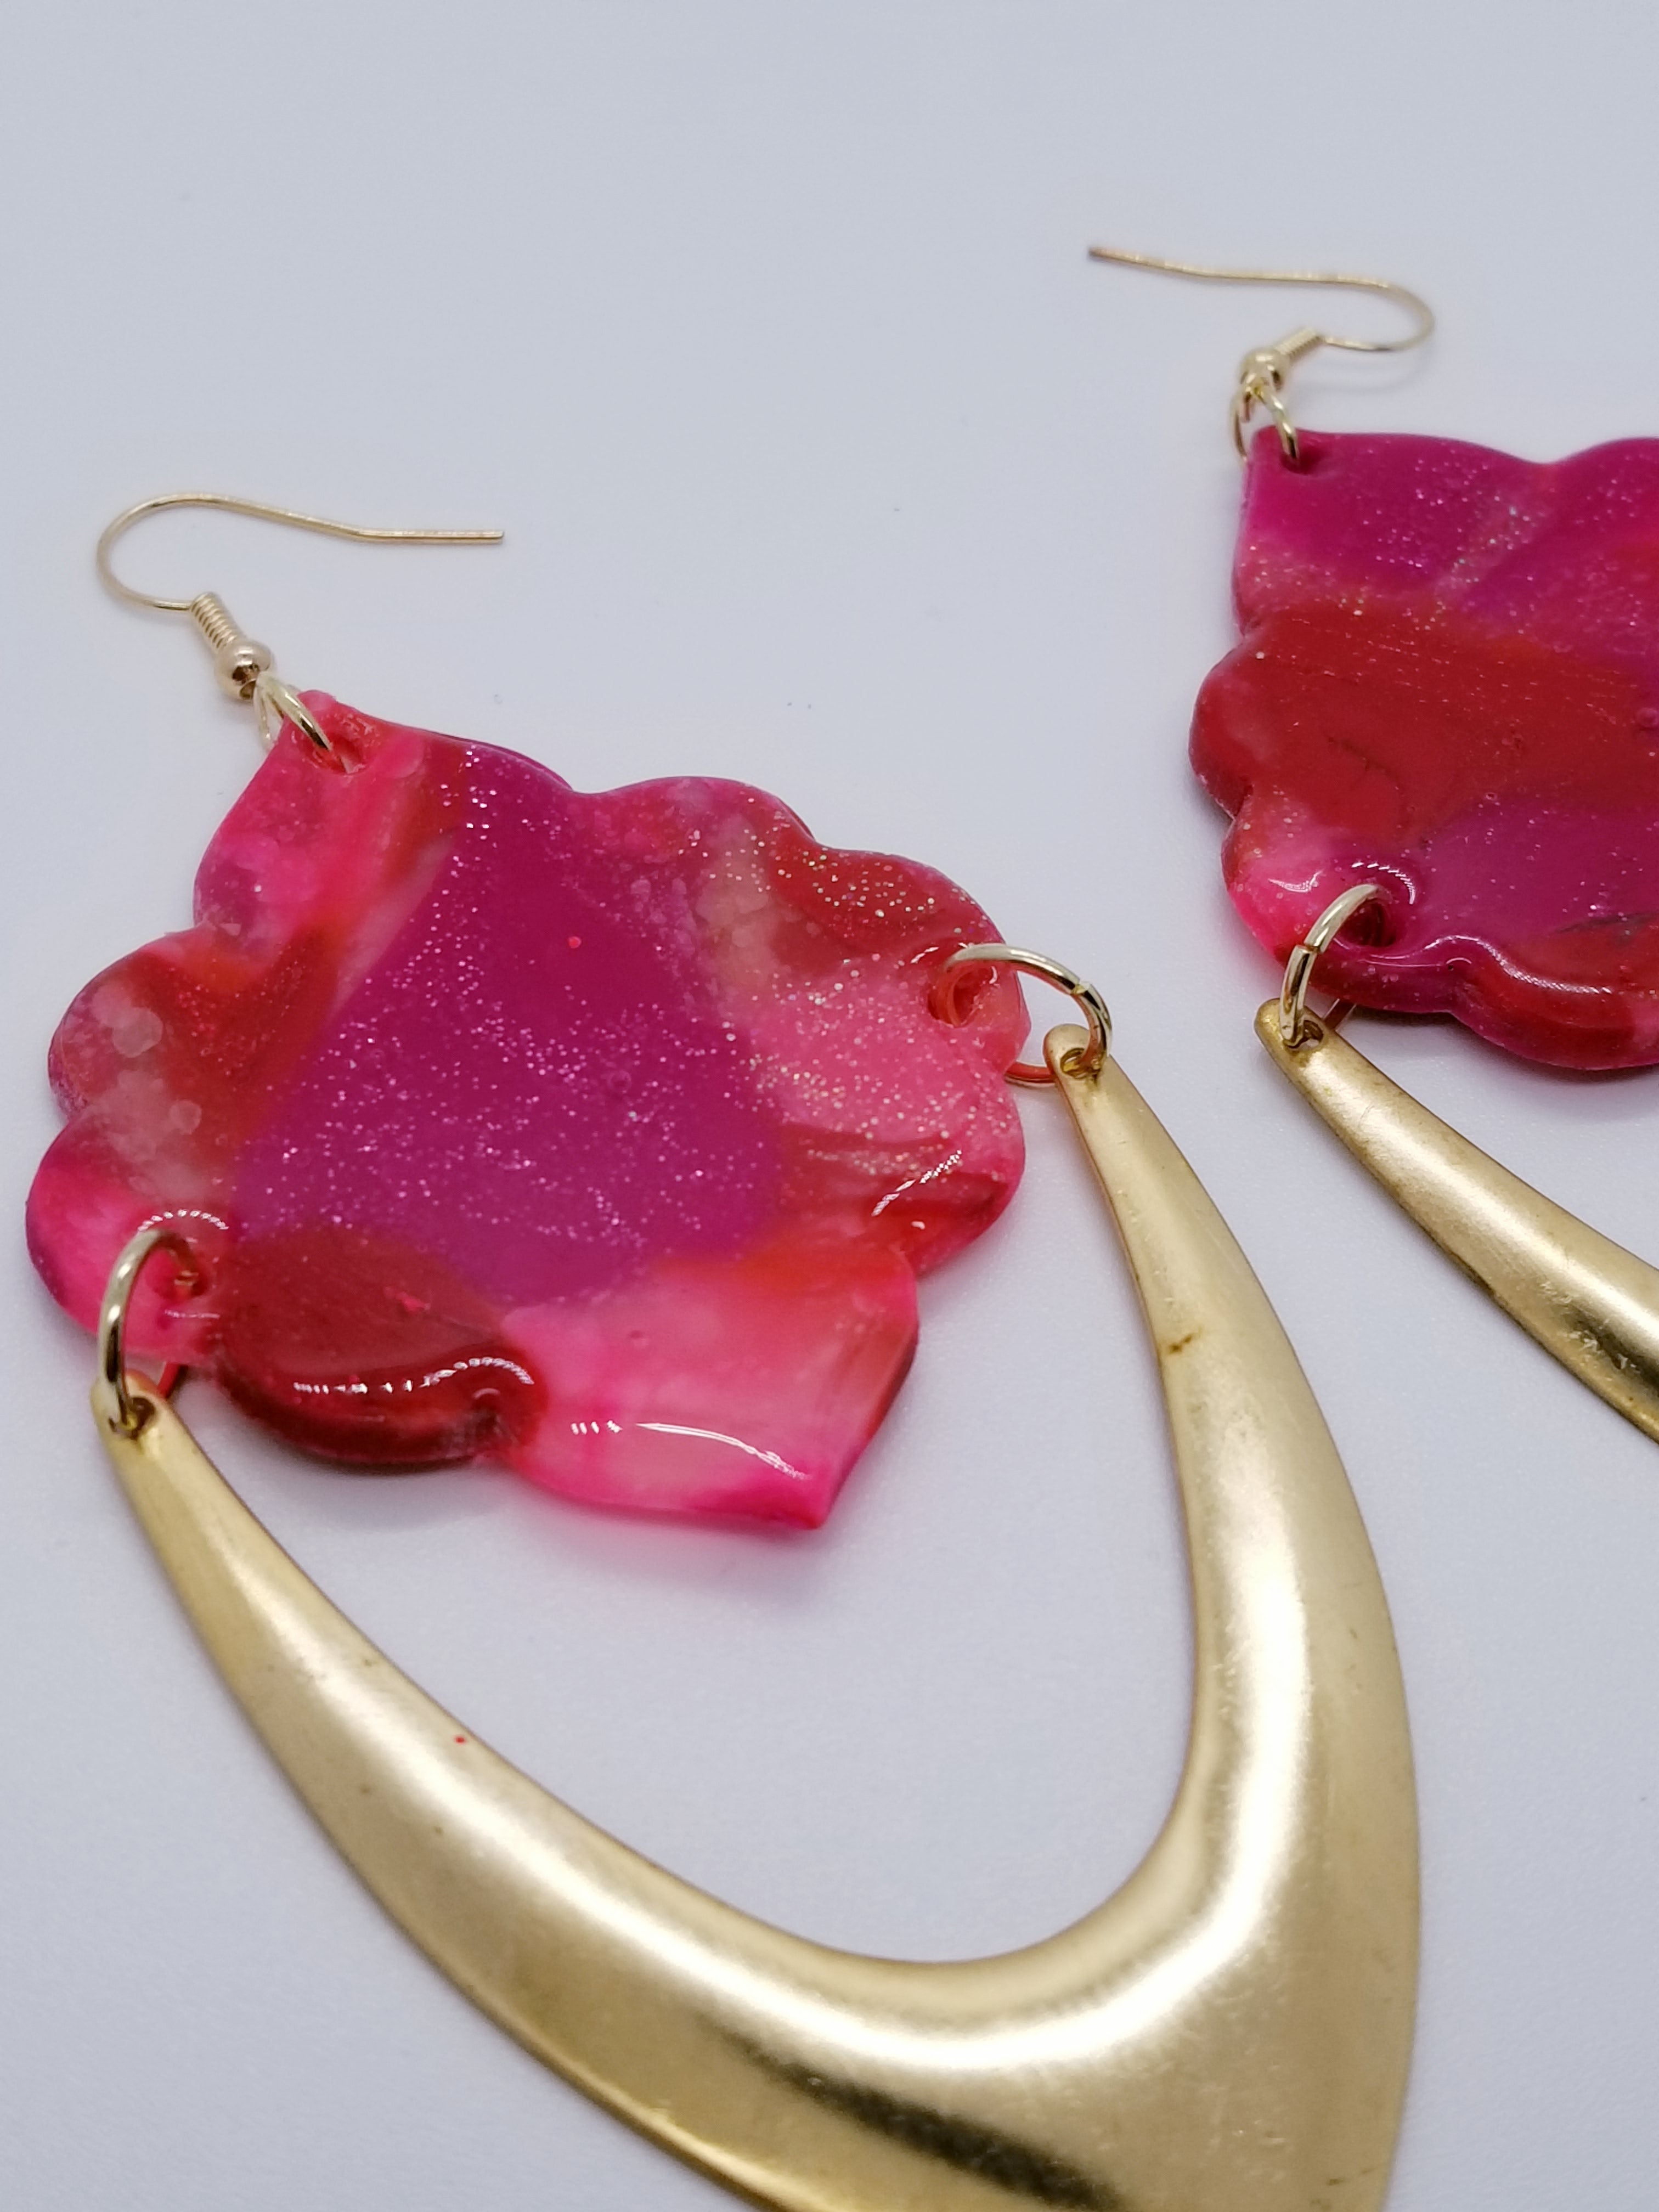 Length: 3.5 inches | Weight: 0.7 ounces   Designed just for you! The earrings are handmade using red pink and swirl gold resin scalloped design, gold arch charm, gold jump rings, gold head pins, and hypoallergenic hooks with back closures. 